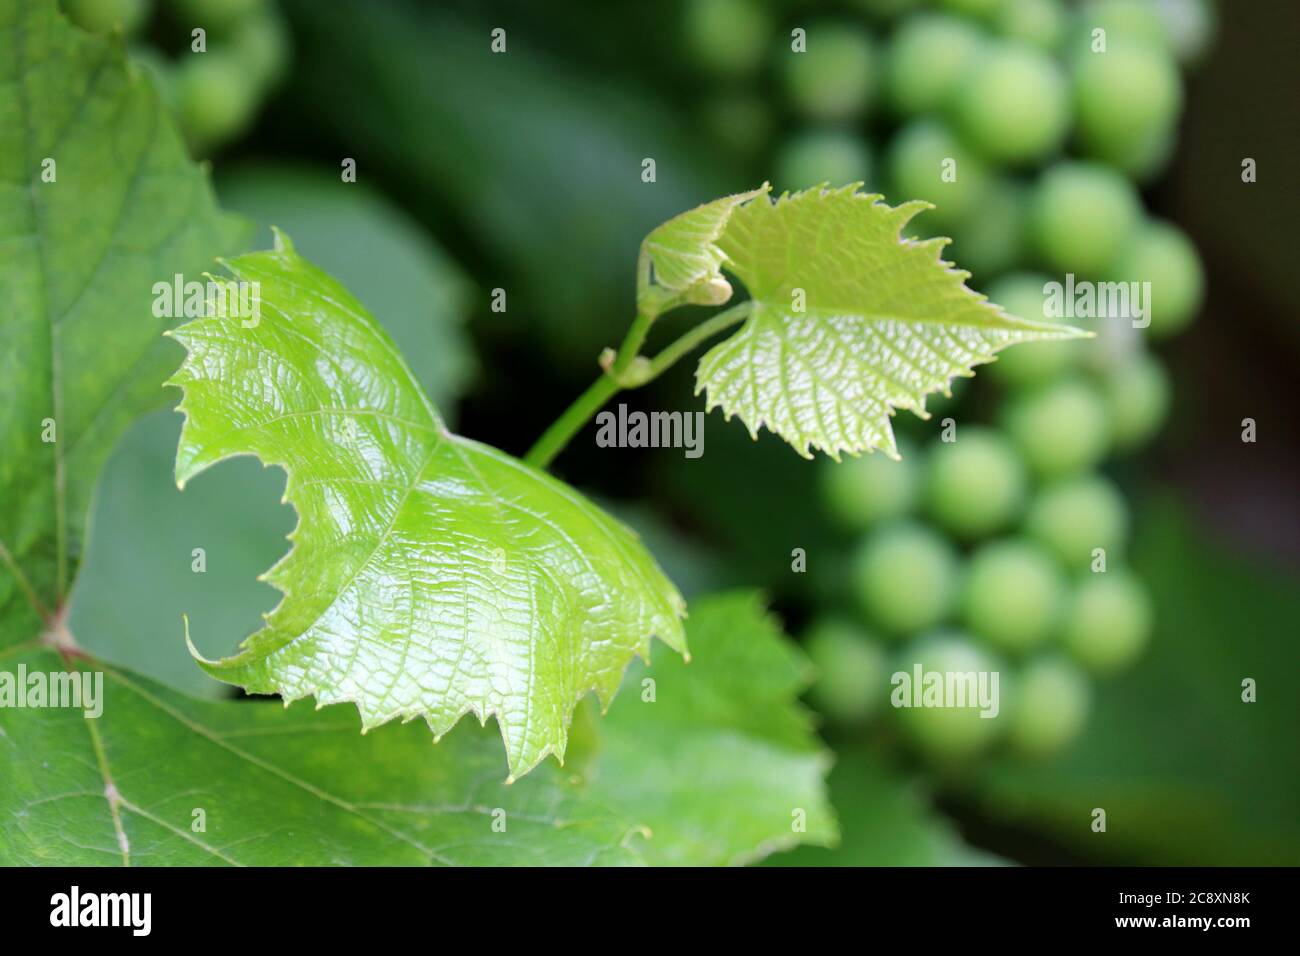 Vineyard in summer, young leaves on background of bunch of green grape. Unripe grapevine, winemaking concept Stock Photo